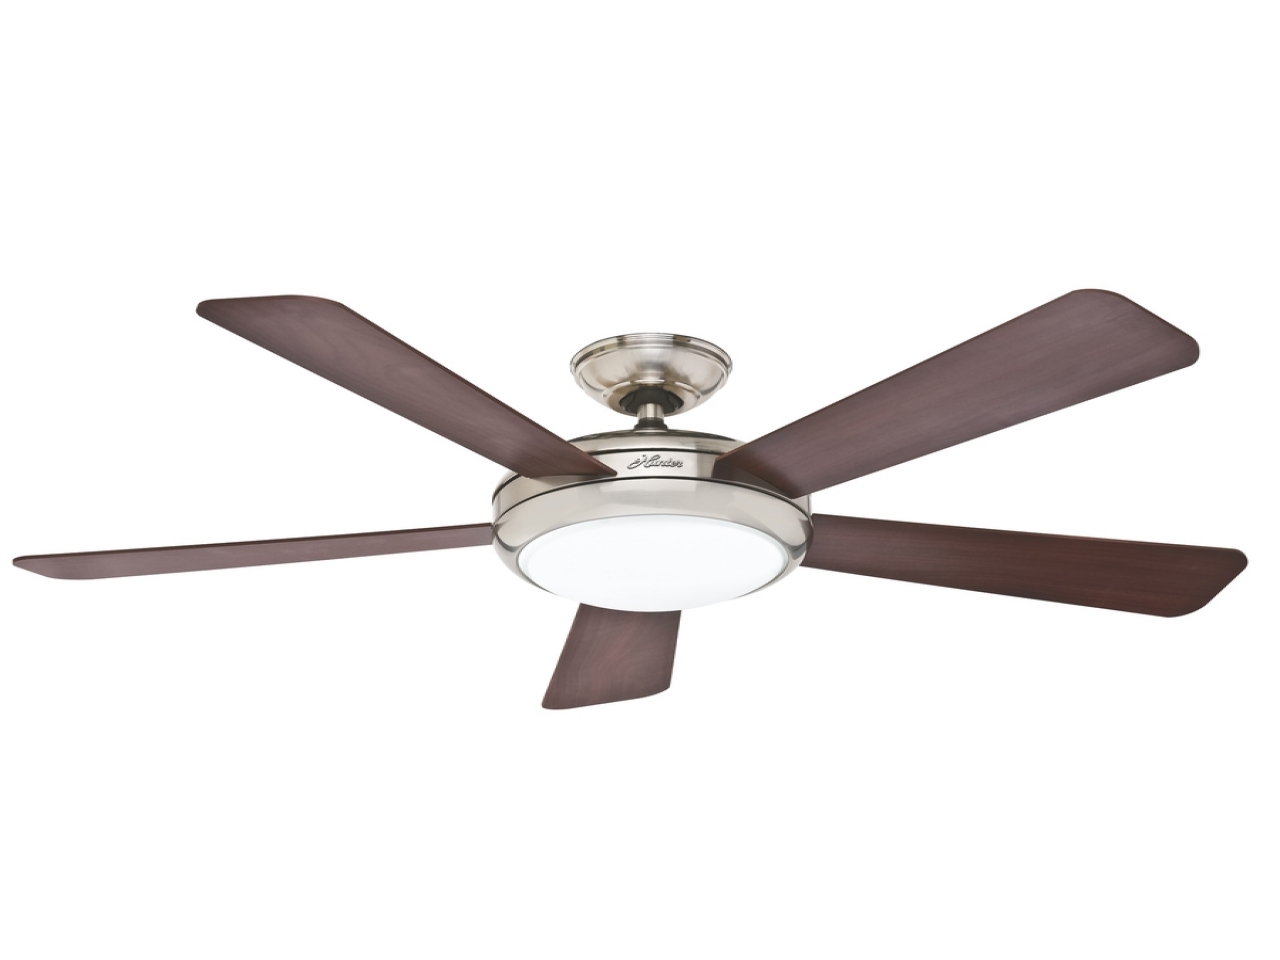 Flush Mount Ceiling Fan With Light And Remote1280 X 960